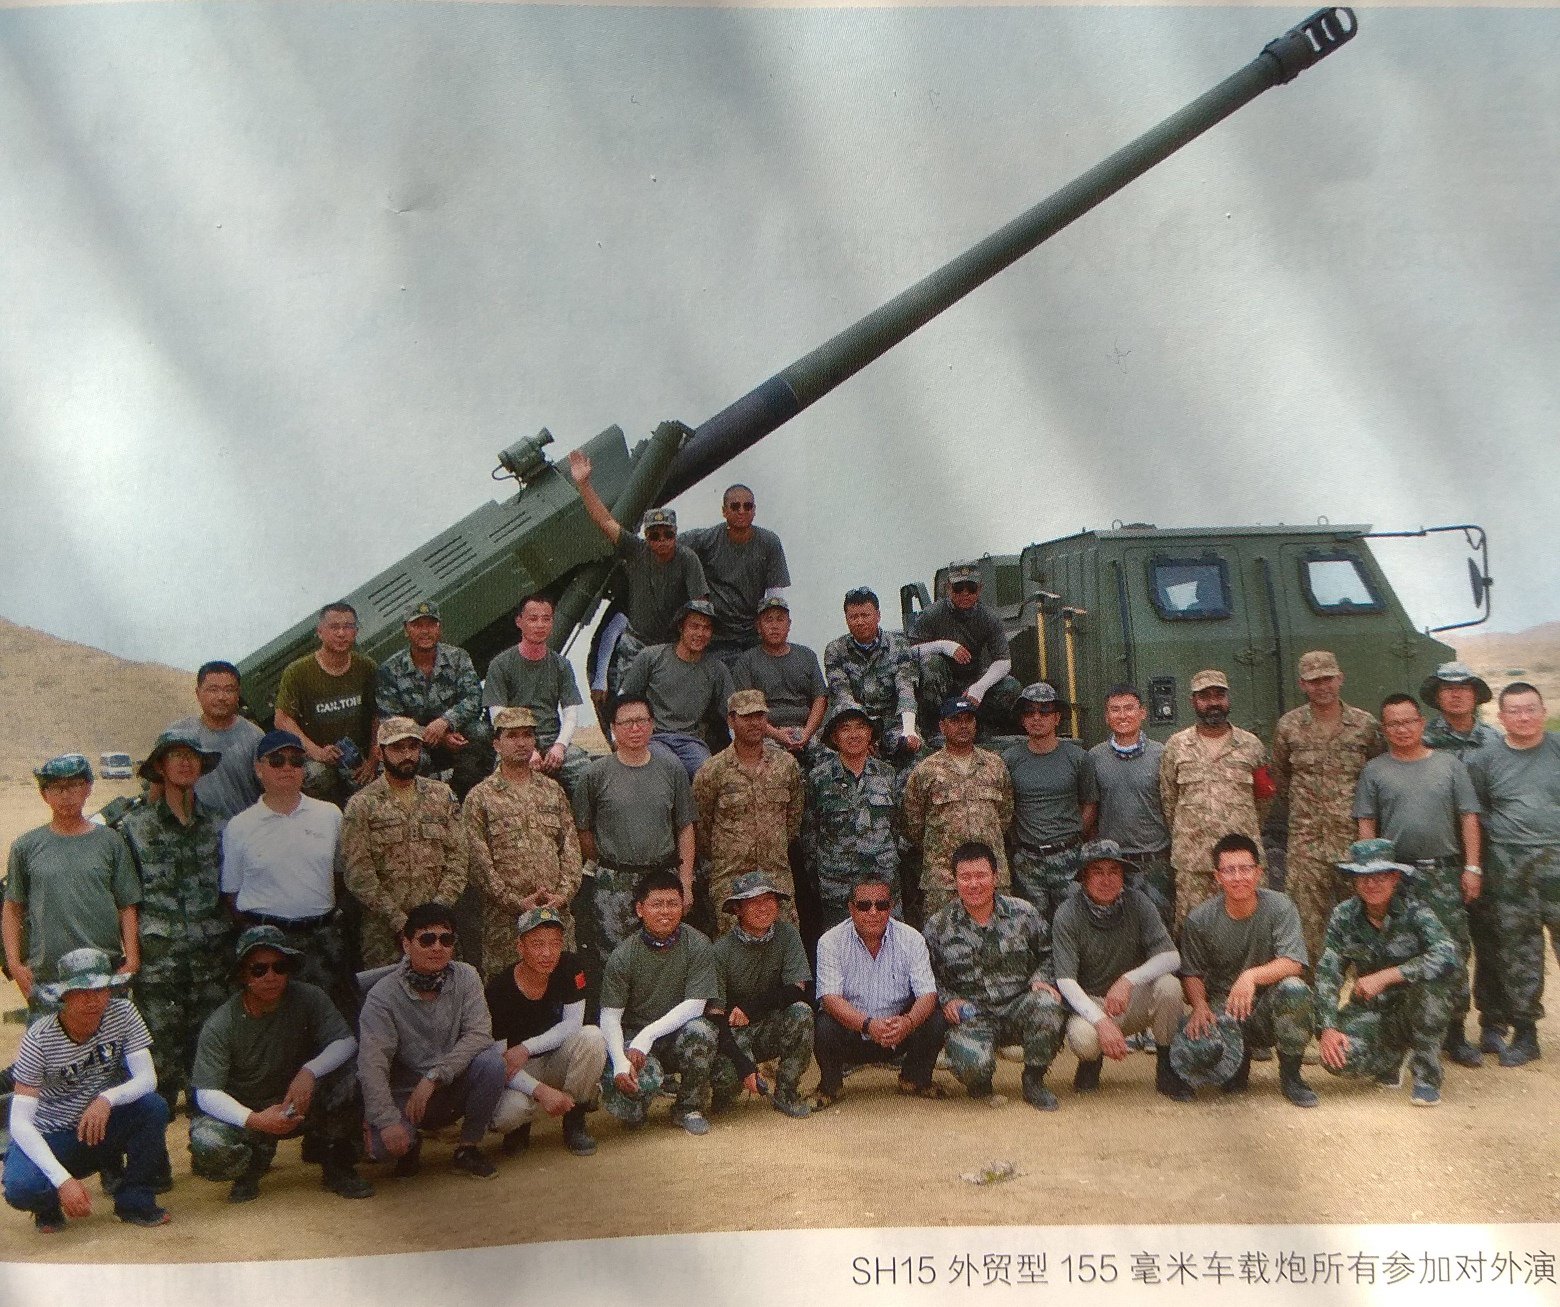 Pakistan Acquires Sh-15 "Nuclear-Capable" Howitzer Artillery Guns From China